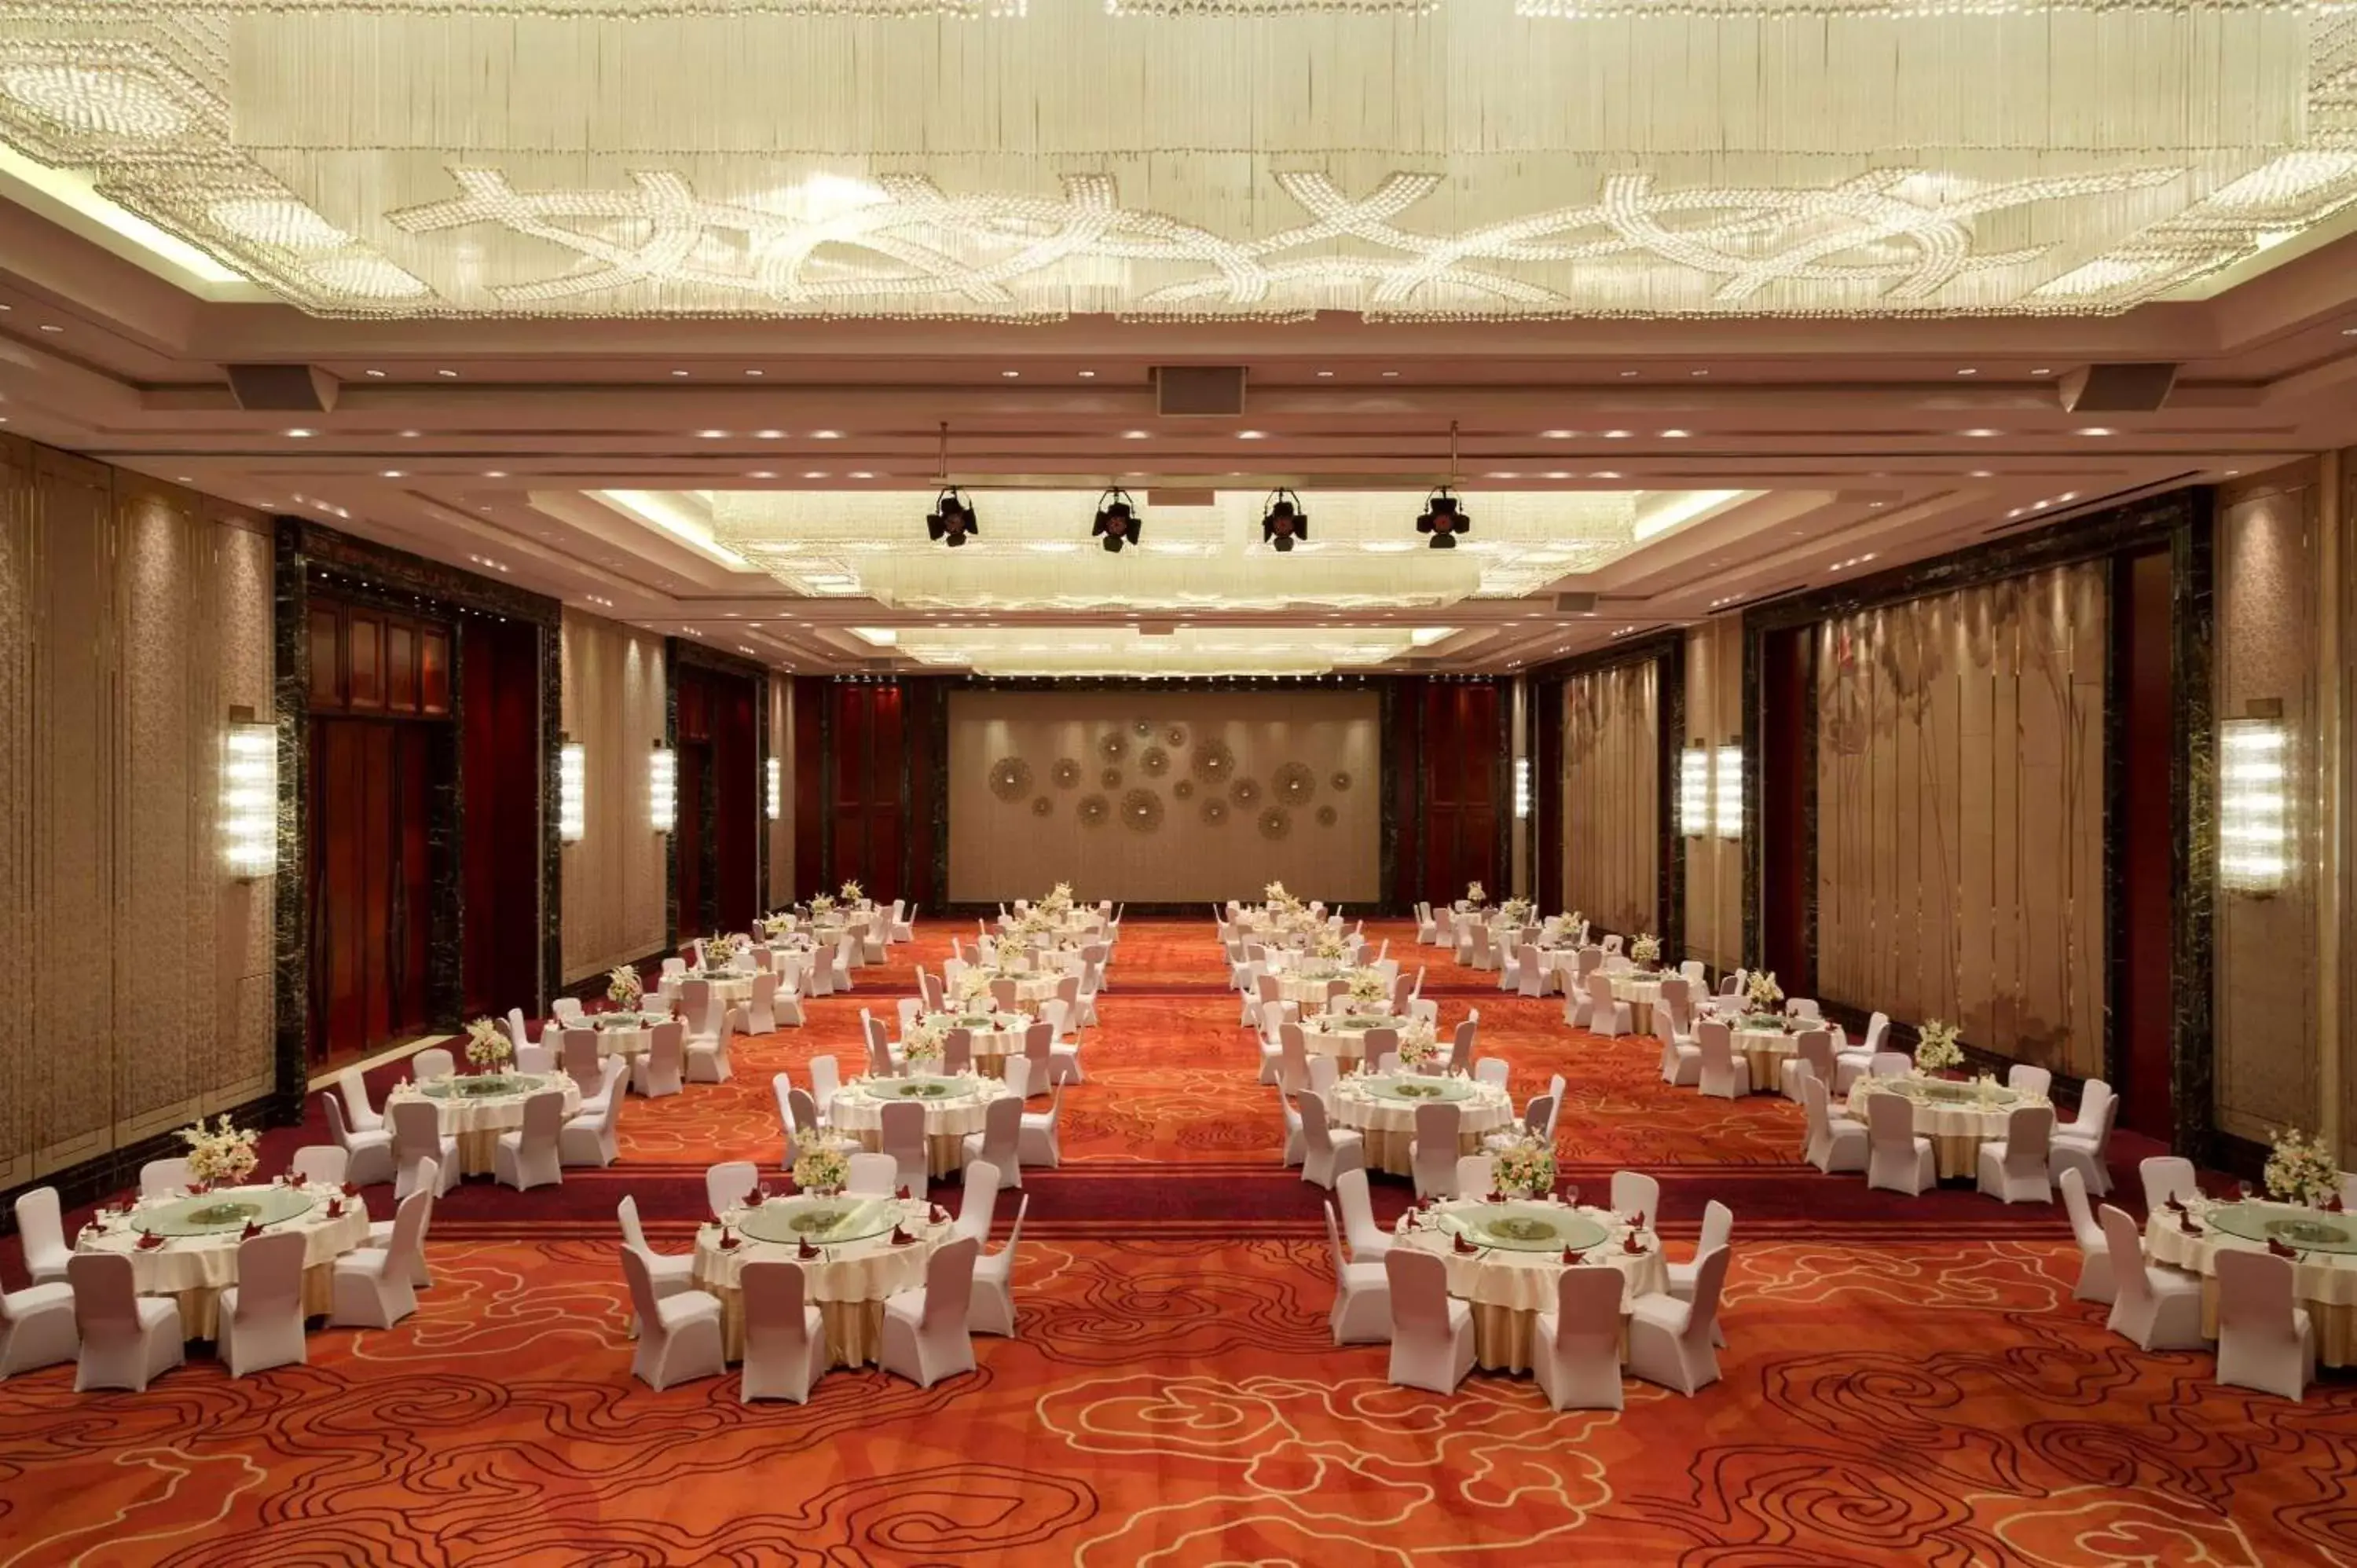 On site, Banquet Facilities in Wyndham Qingdao